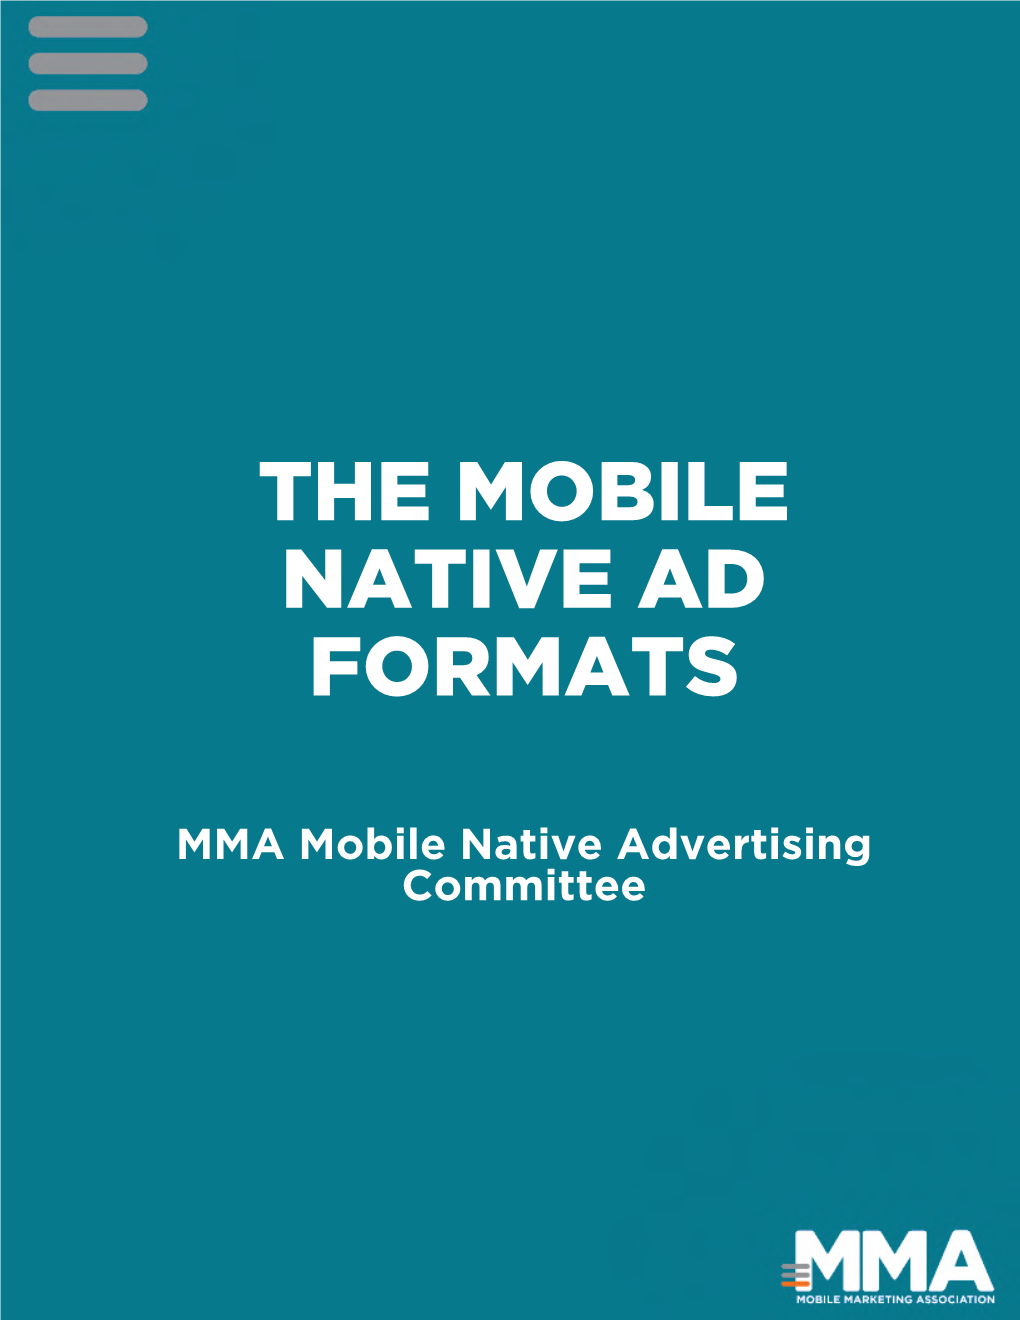 The Mobile Native Ad Formats